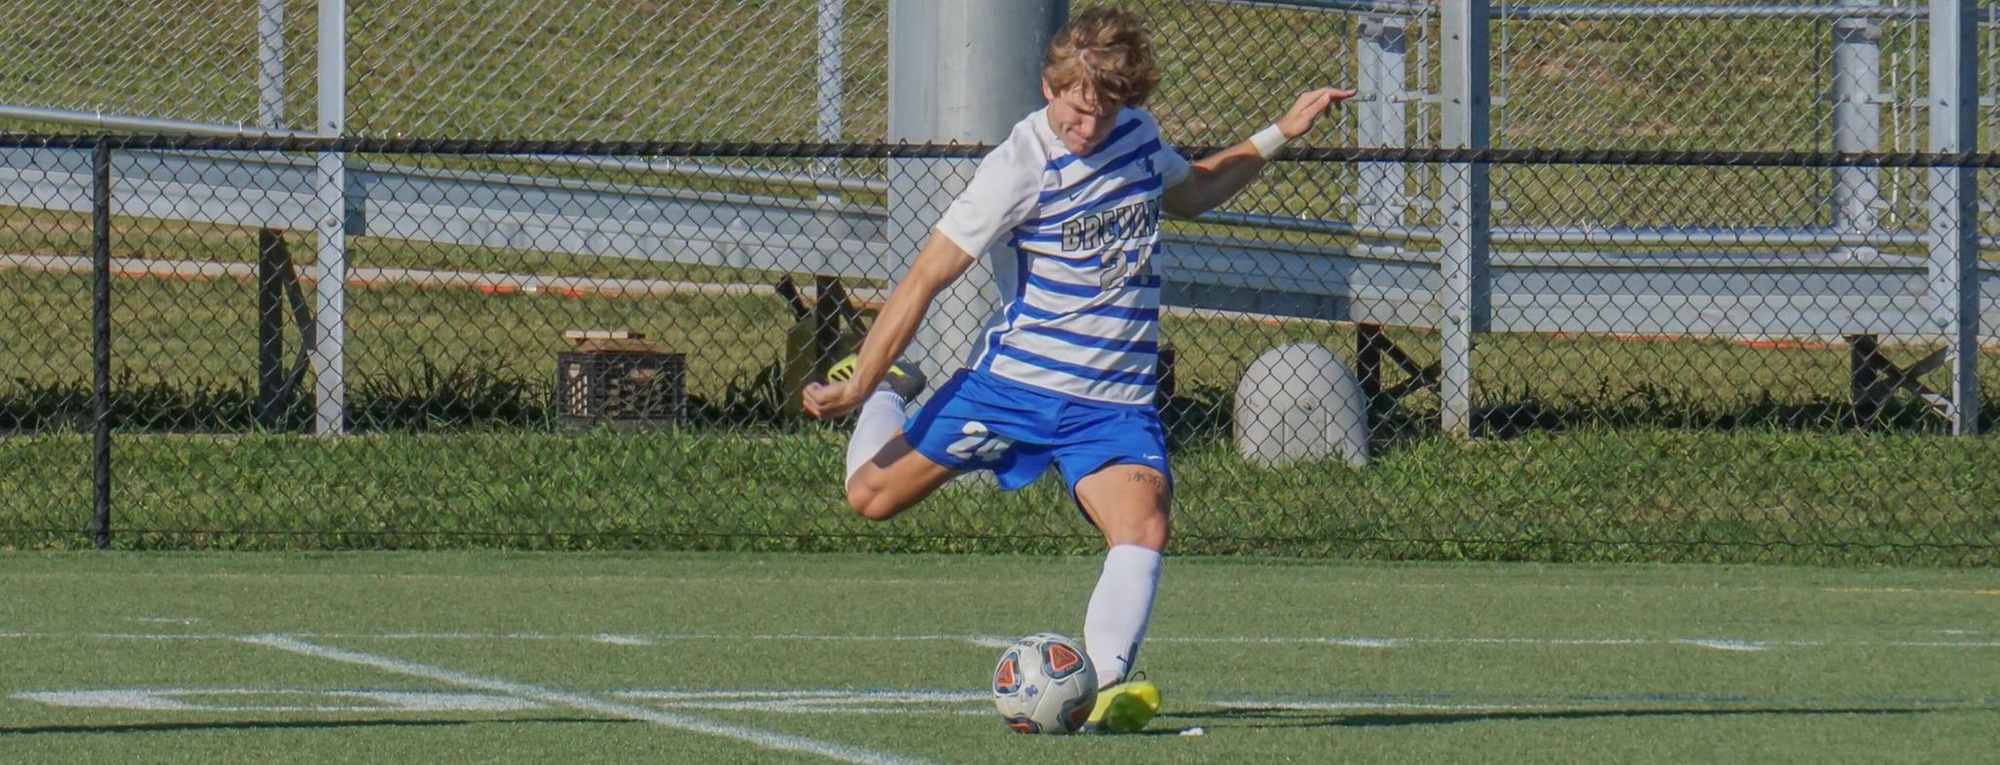 Tornados Secure NCAA-Era Record 10th Win of Season with 1-0 Victory Over Greensboro